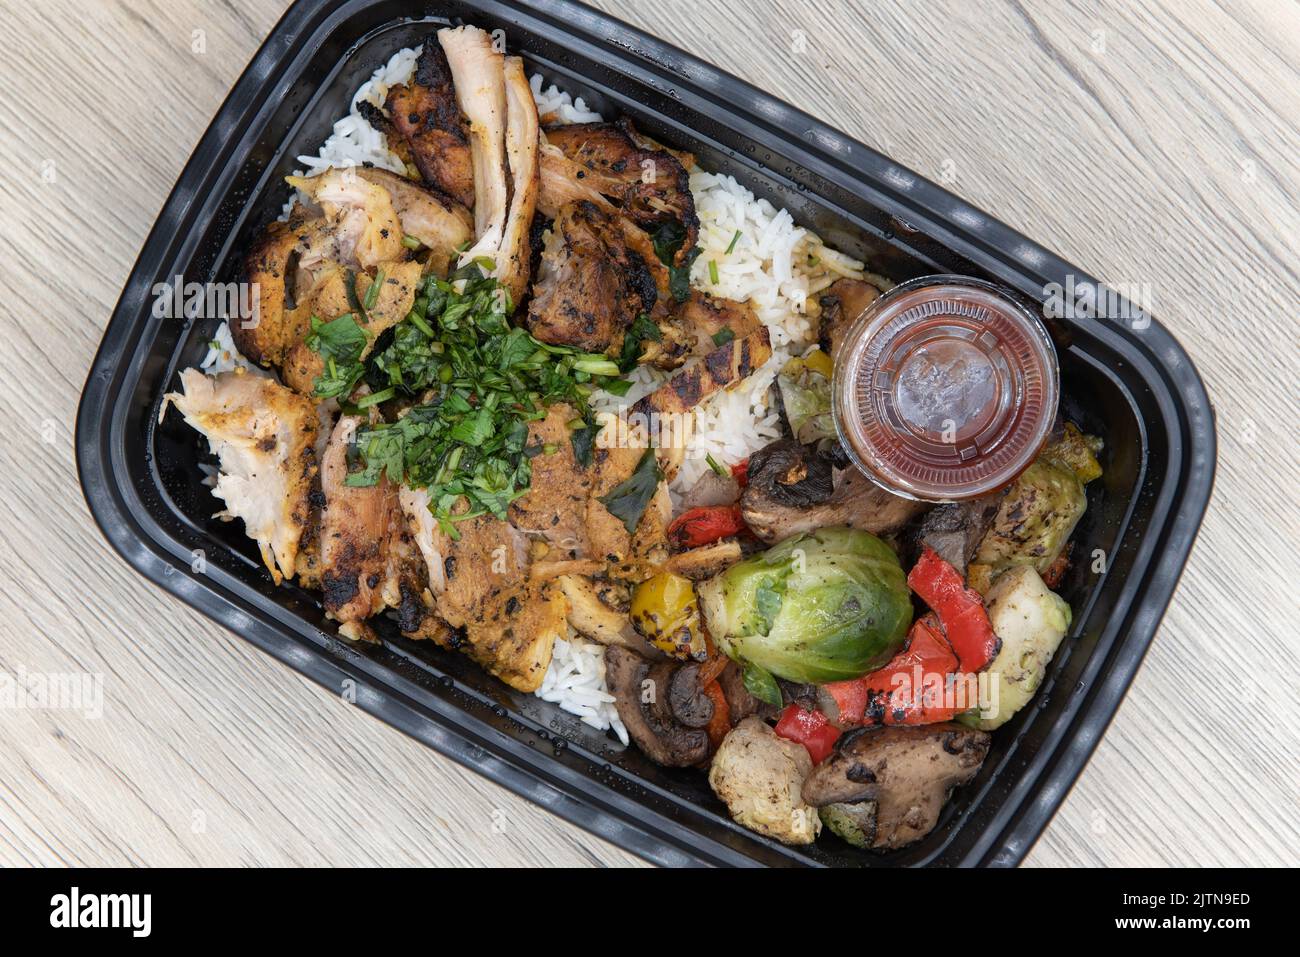 Overhead view of take out order of shawarma chicken with jasmin rice is conveniently packed in a microwavable container. Stock Photo